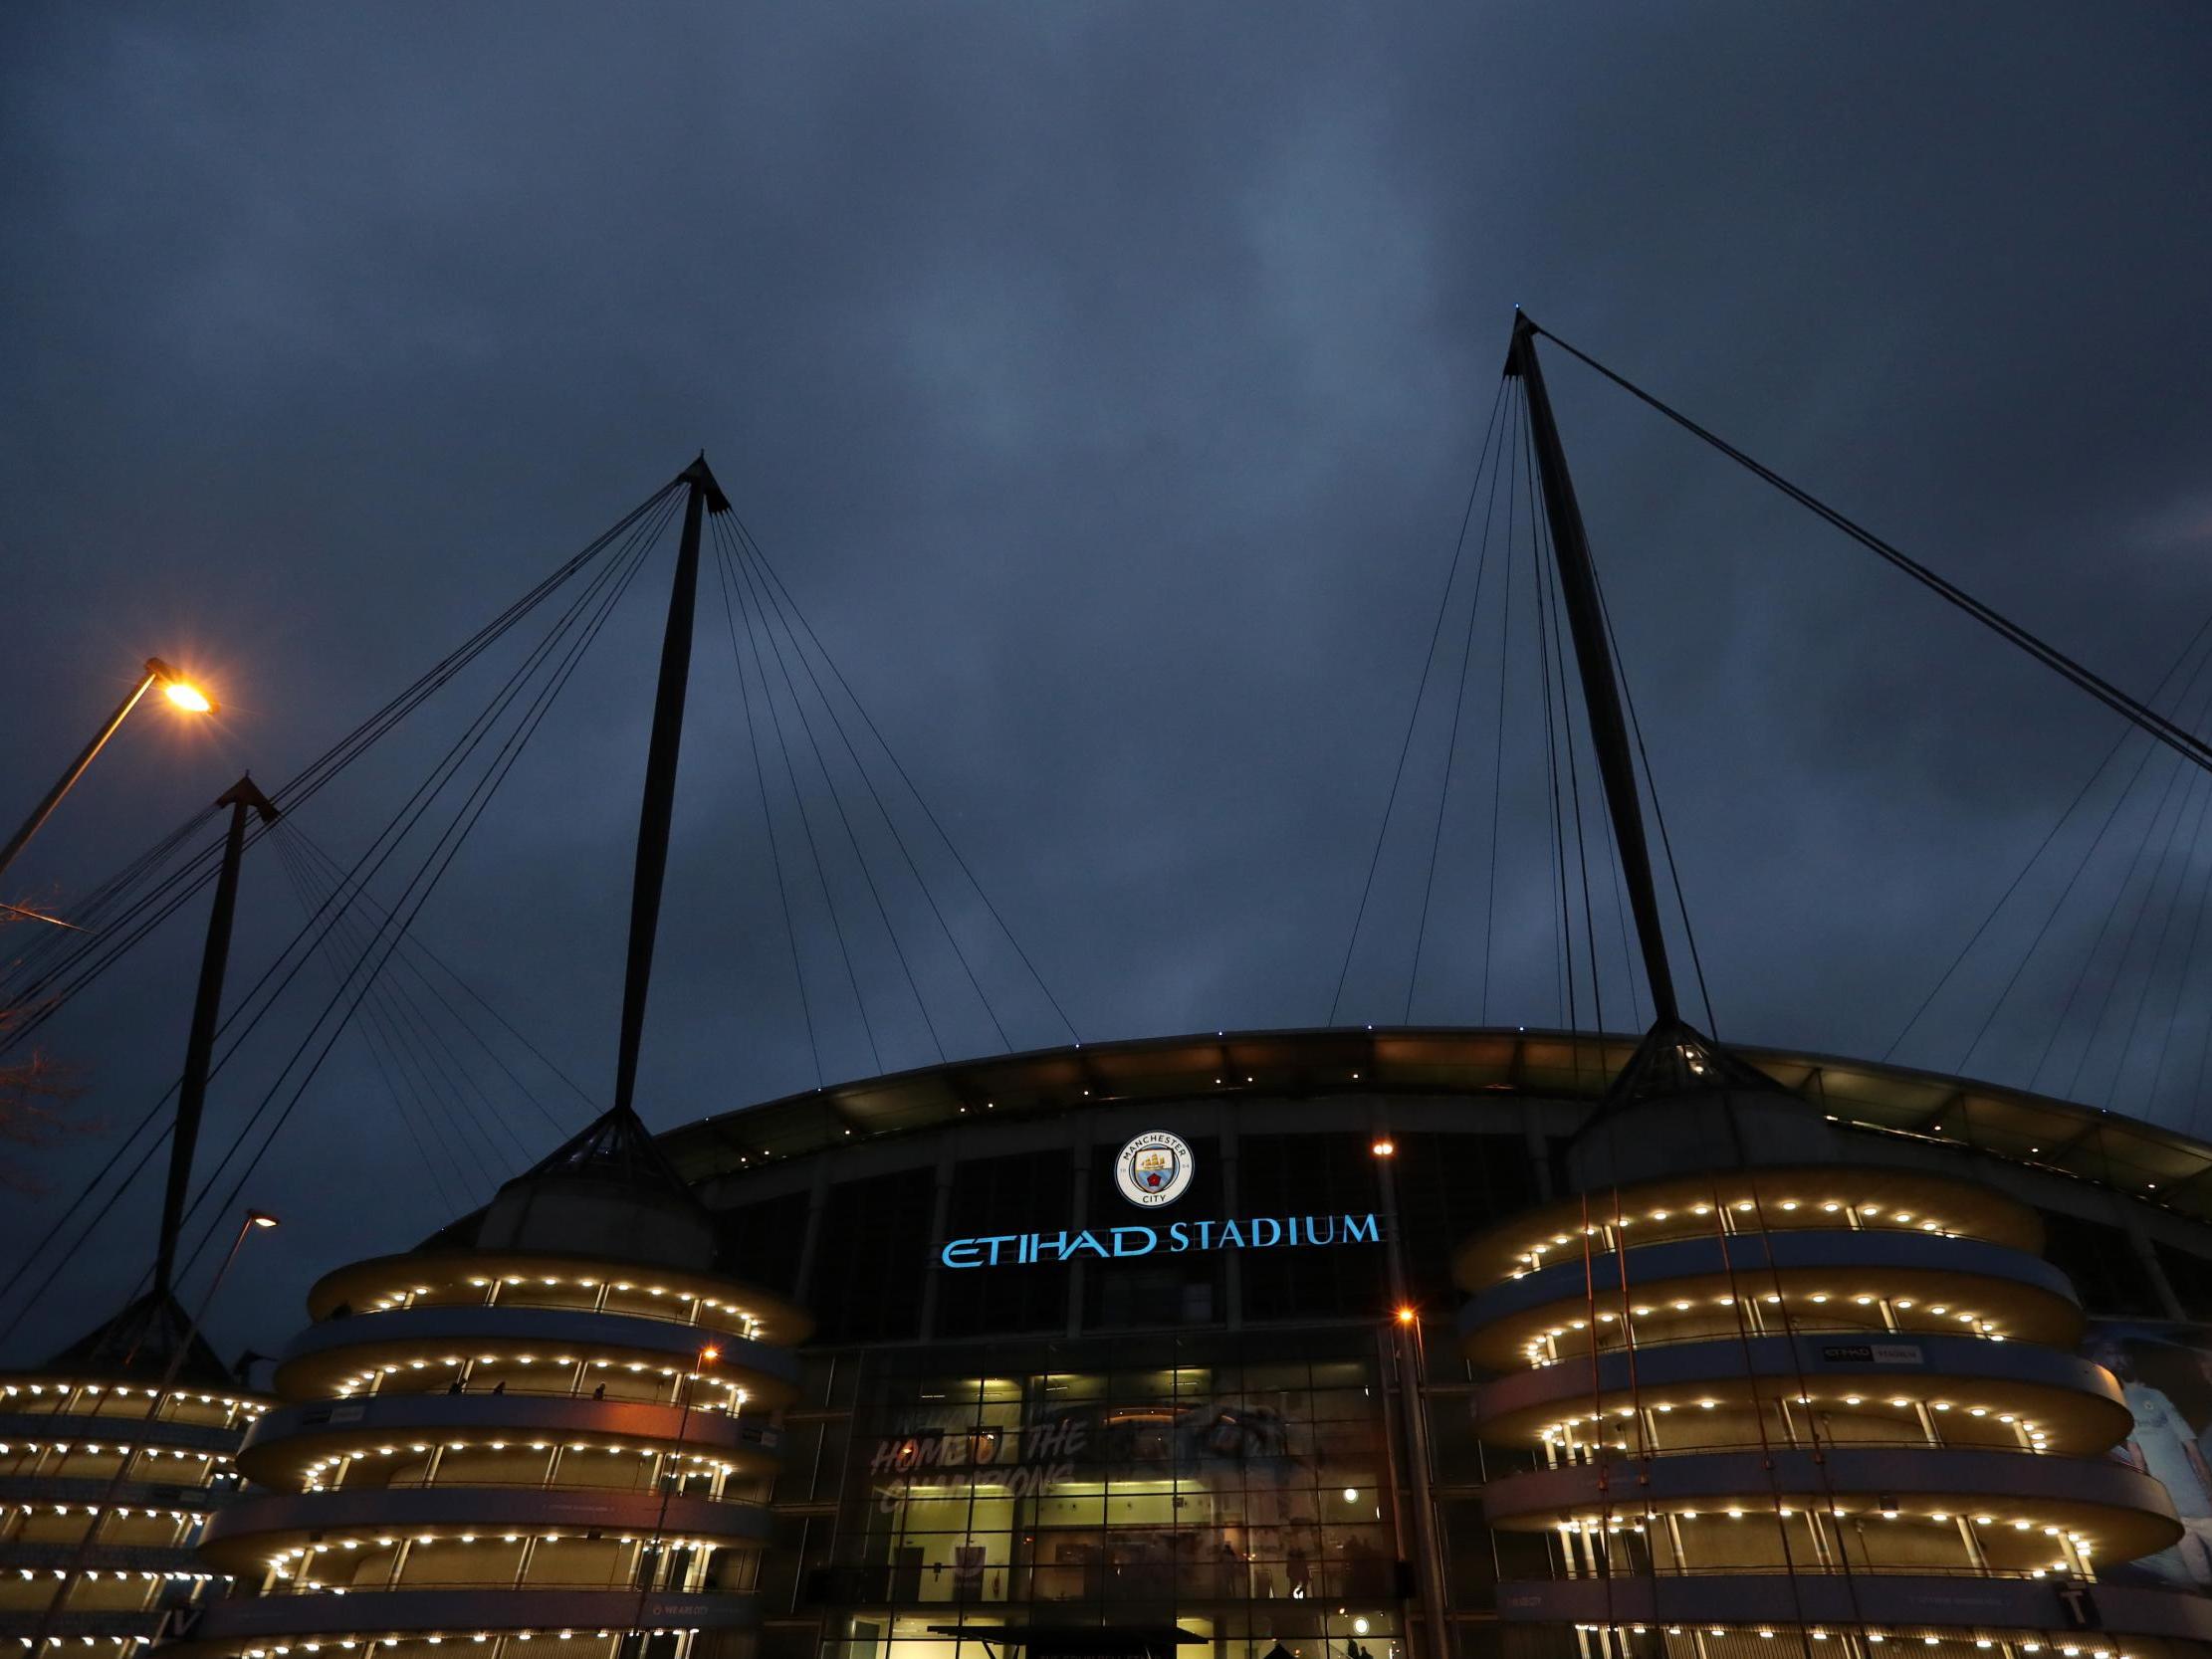 Man City's fixture with Arsenal was called off on Tuesday evening